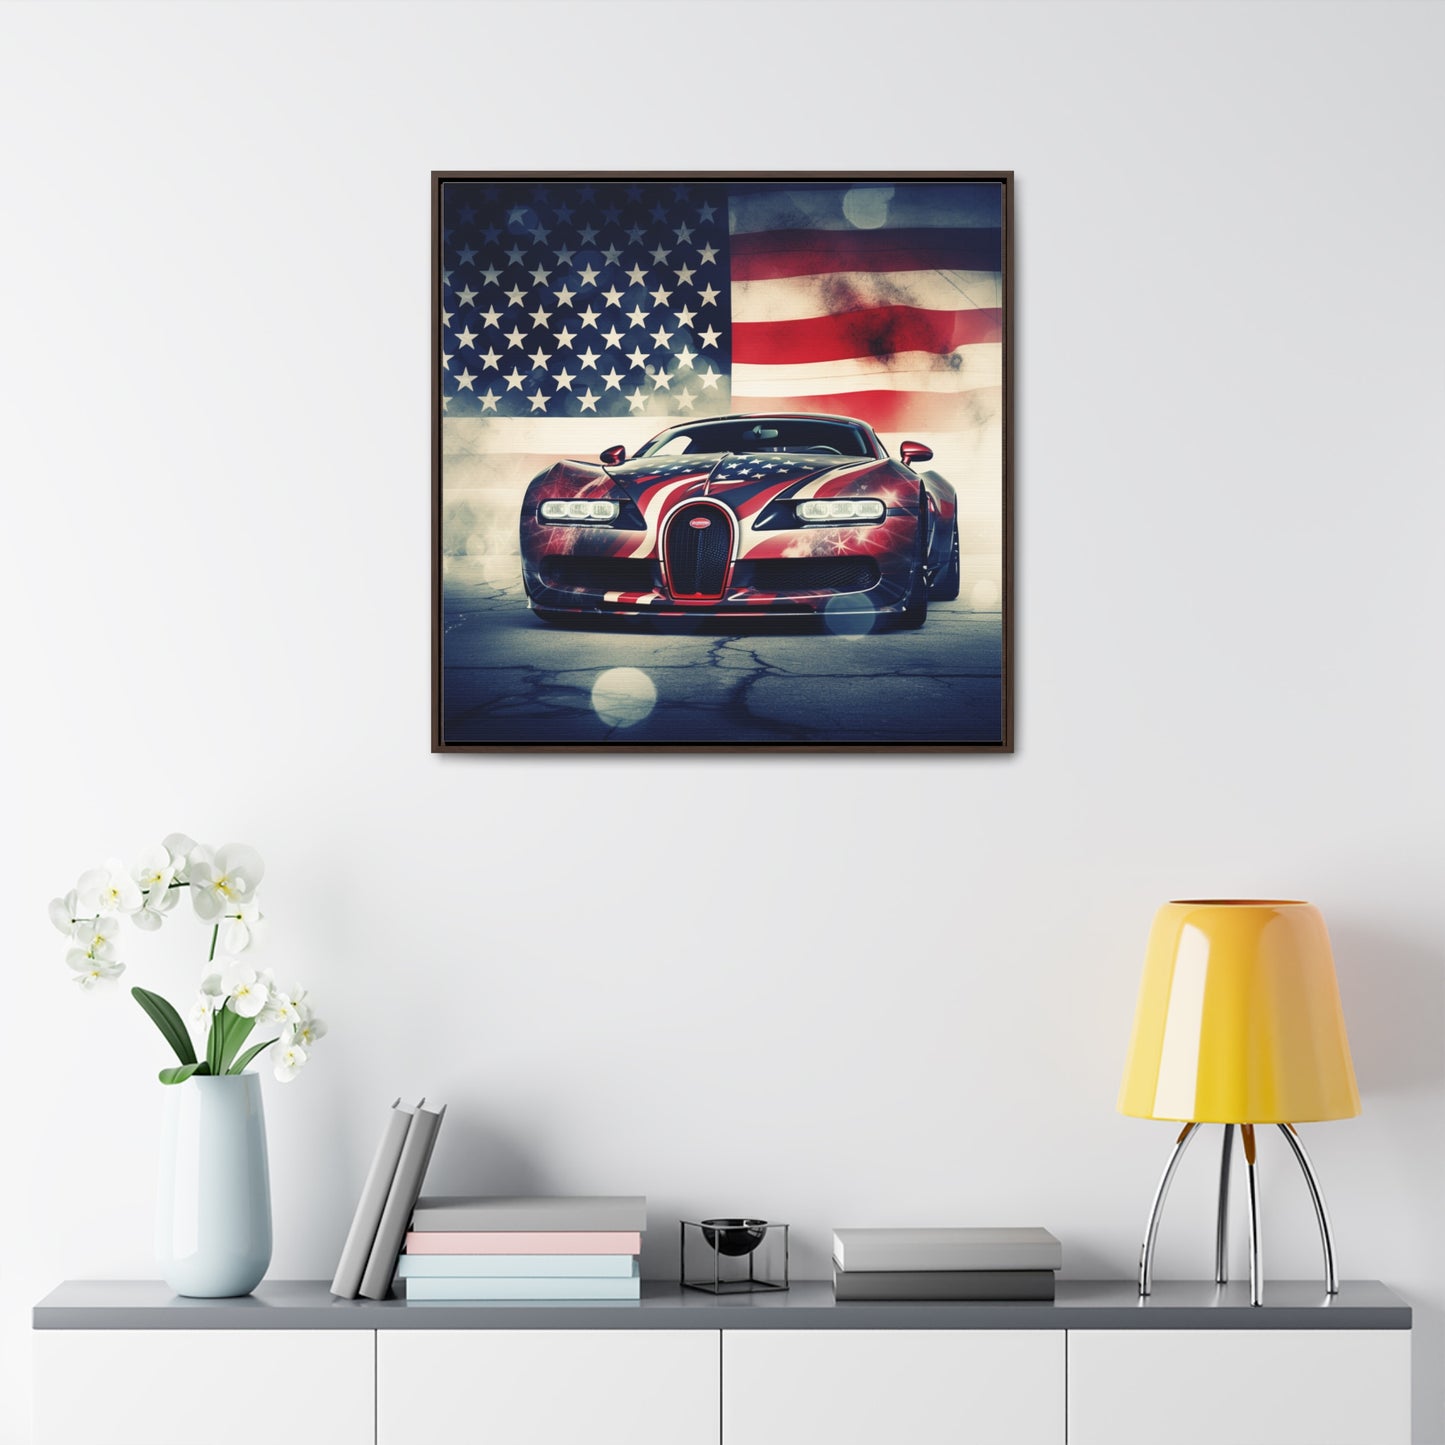 Gallery Canvas Wraps, Square Frame Abstract American Flag Background Bugatti 1